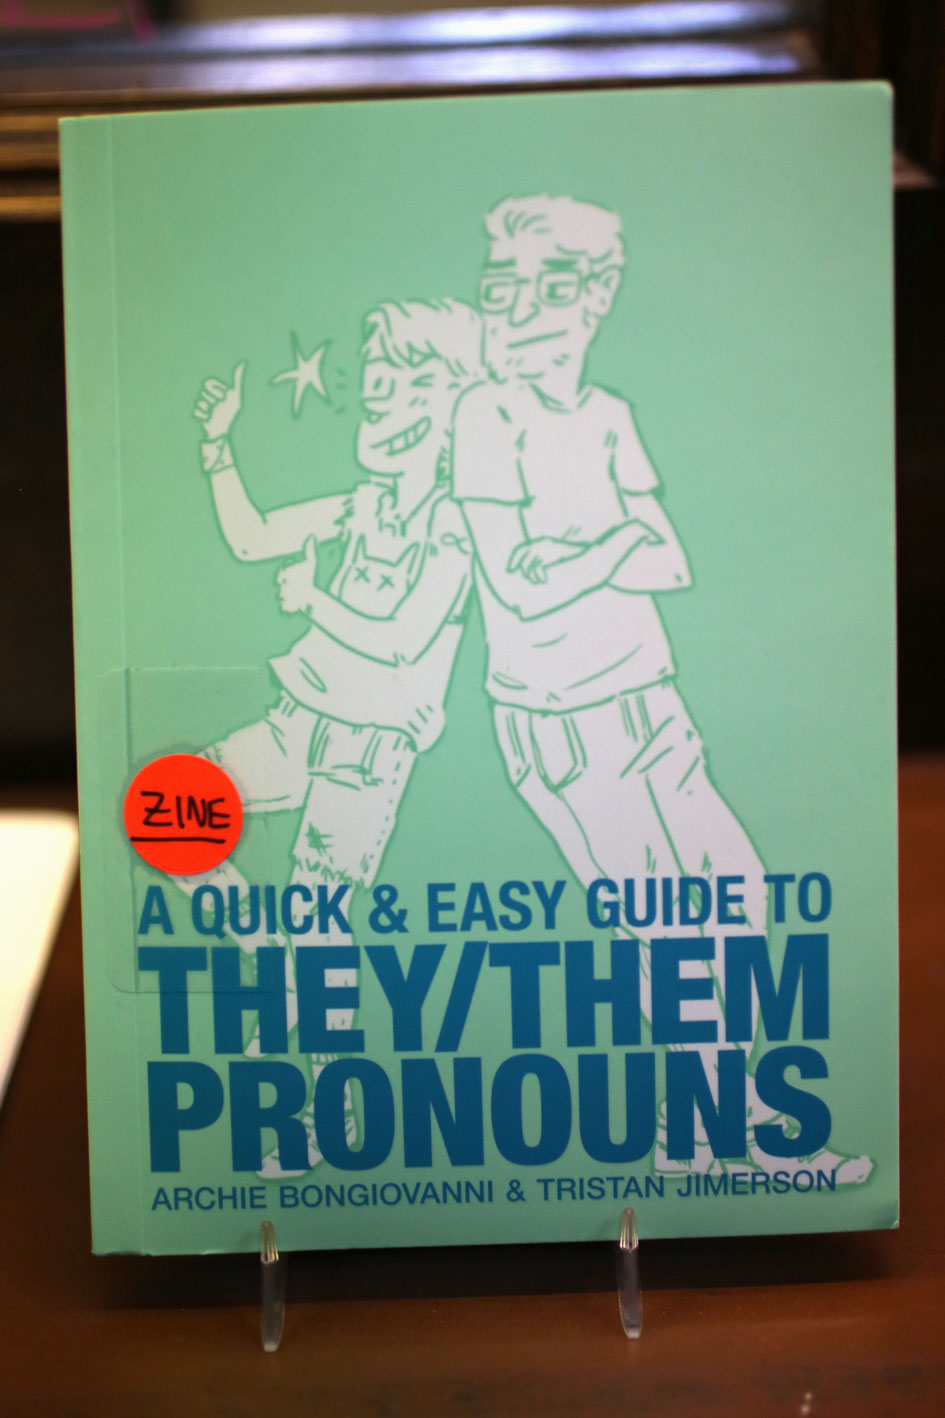 A Quick and Easy Guide to They/Them Pronouns by Archie Bongiovanni